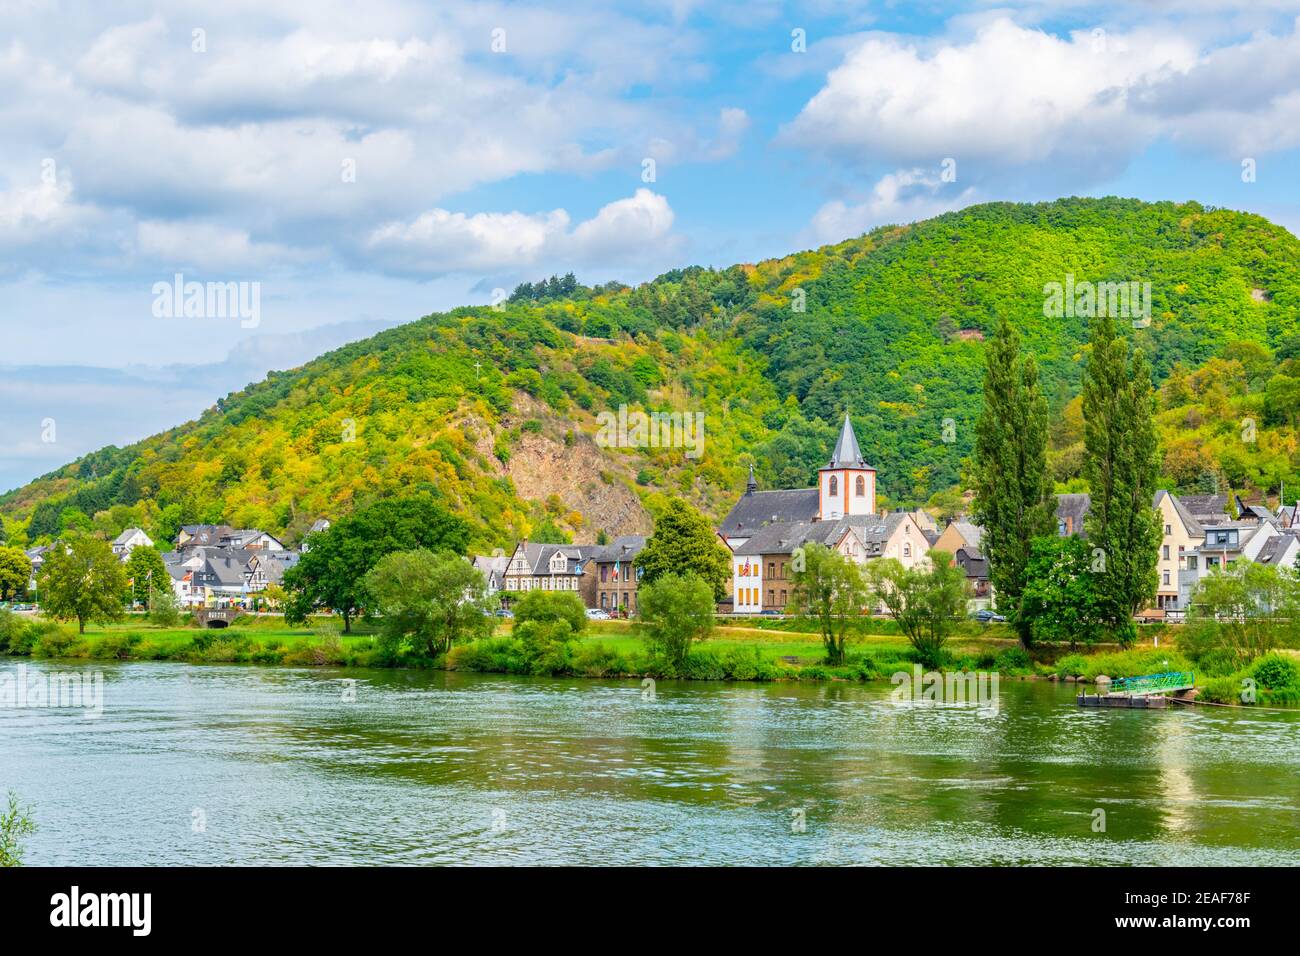 Burgen town in Germany Stock Photo